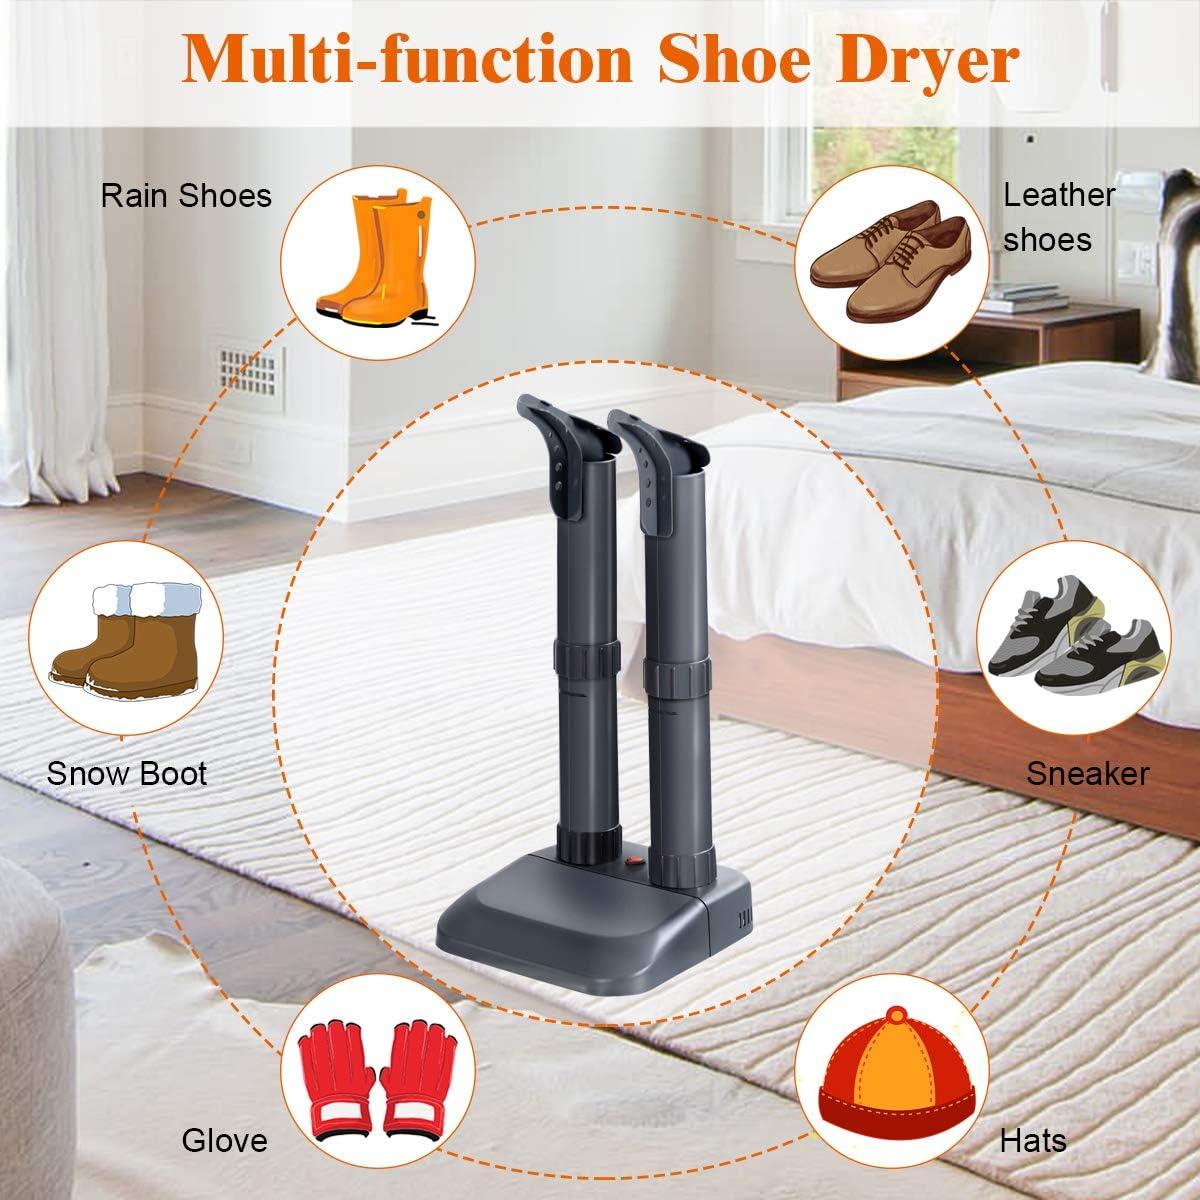 COSTWAY Boot Dryer, Electric Shoe Dryer and Warmer with Heat Blower, Fast  Drying, Overheat Protection, Easy to Assemble, Shoe Dryer for Work Boots,  Shoes, Gloves and Socks (2-Shoe)